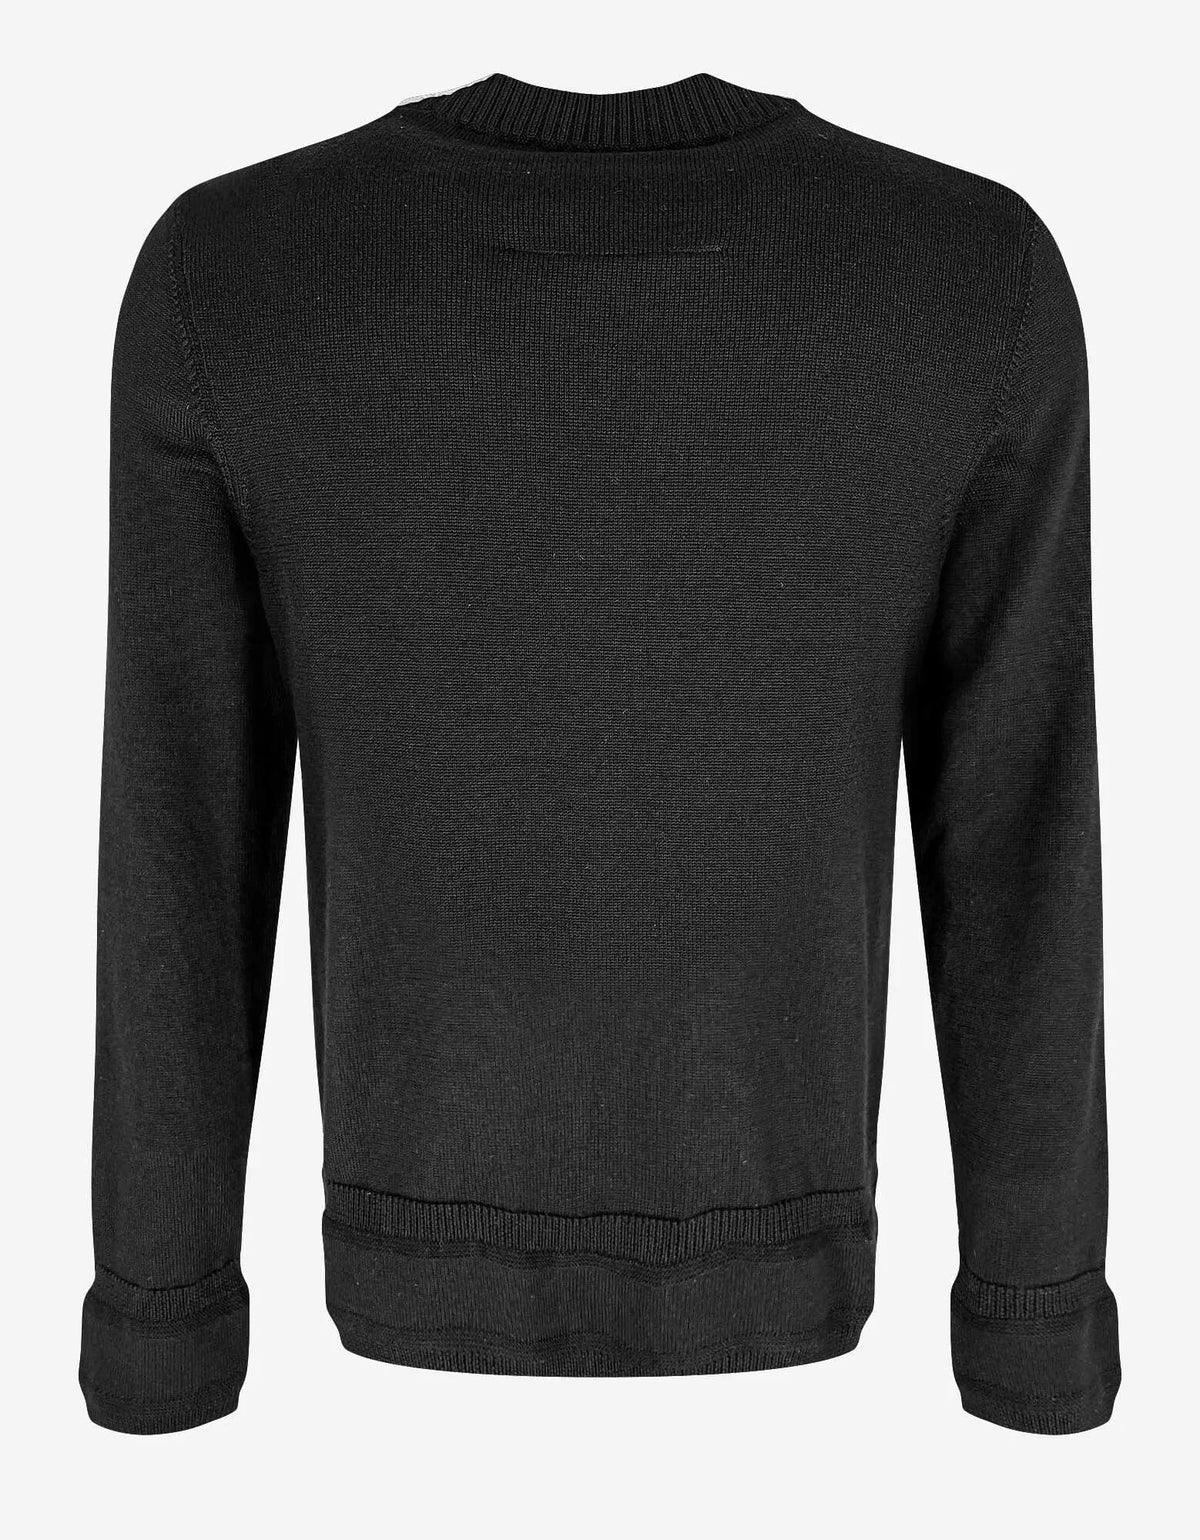 Givenchy Black Tag-Effect Logo Sweater